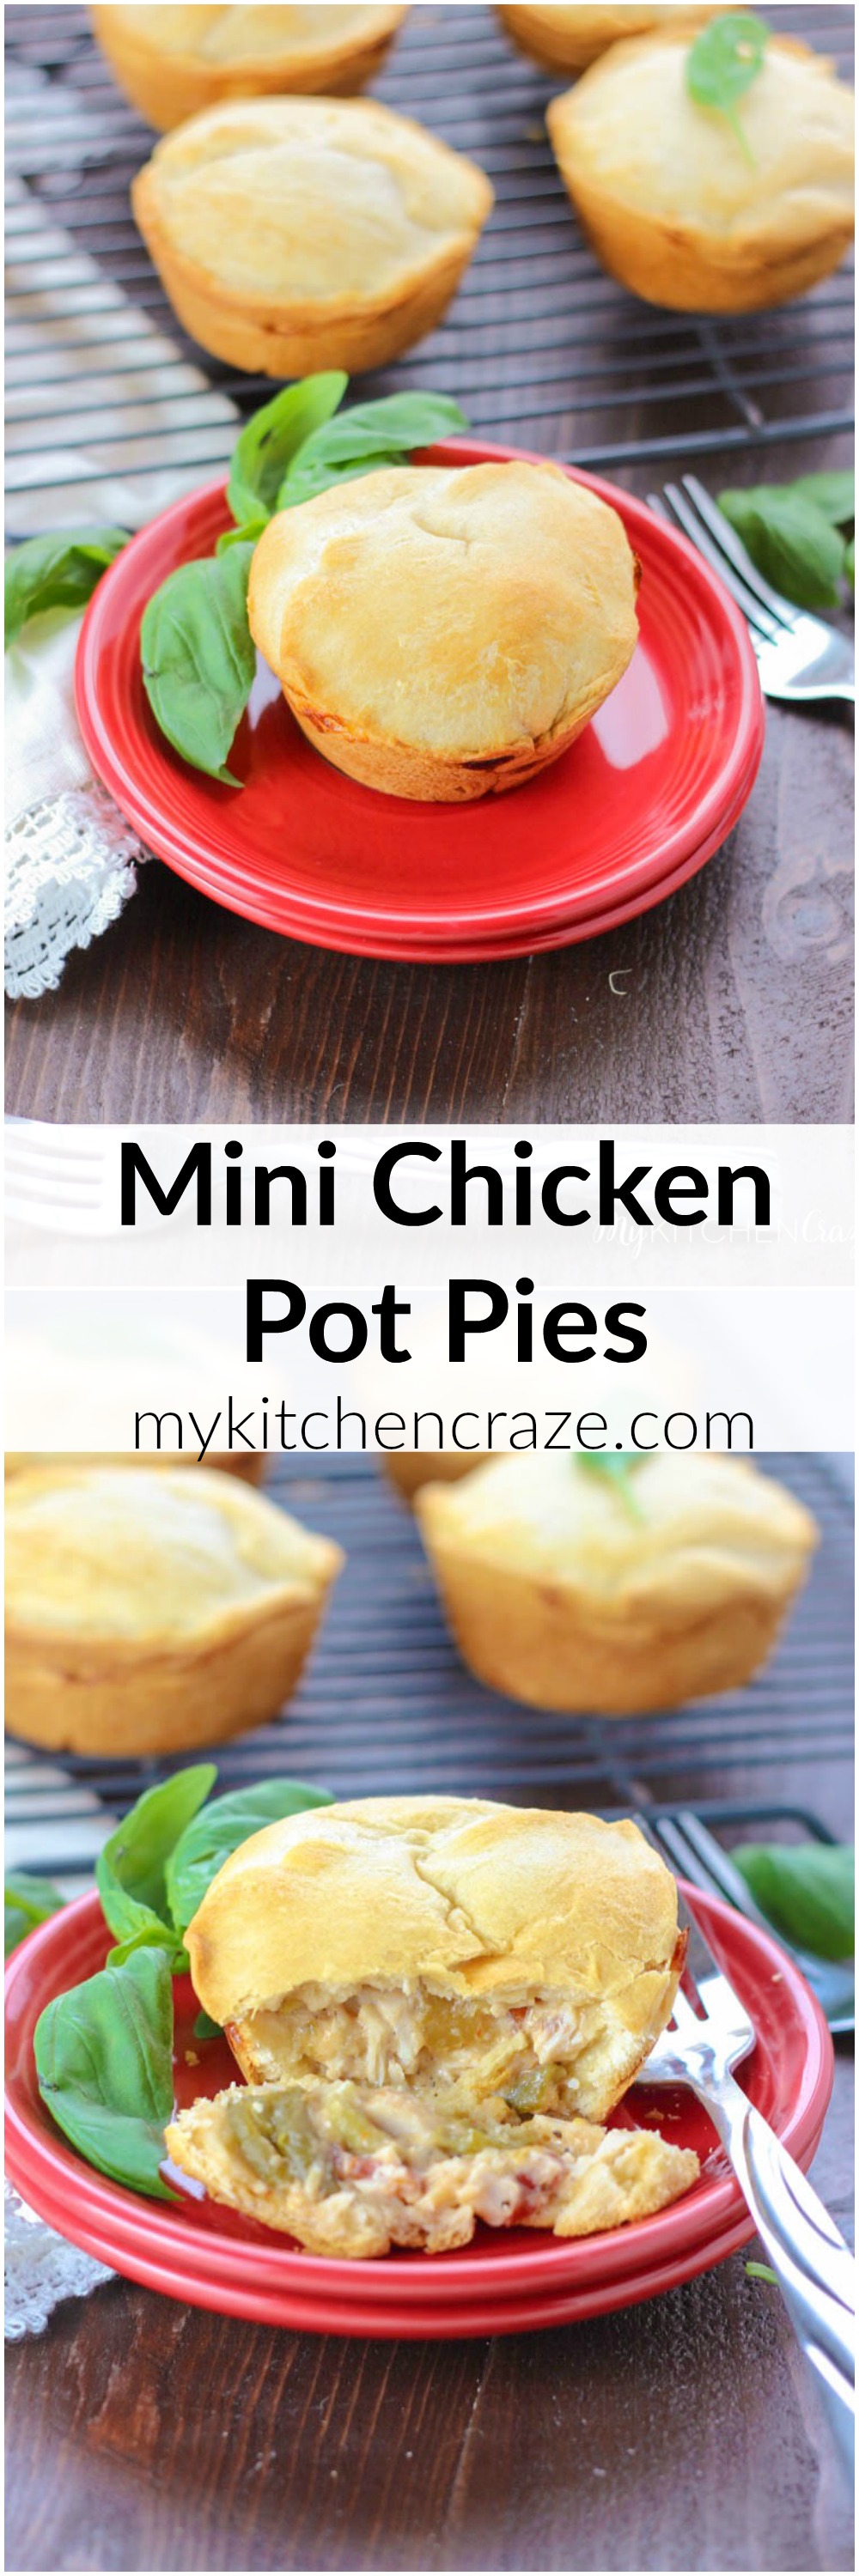 Mini Chicken Pot Pies ~ mykitchencraze.com ~ Everything you're used to in a chicken pot pie, but made mini! Easy to make and tastes delicious! #EatLightEatRight #ad